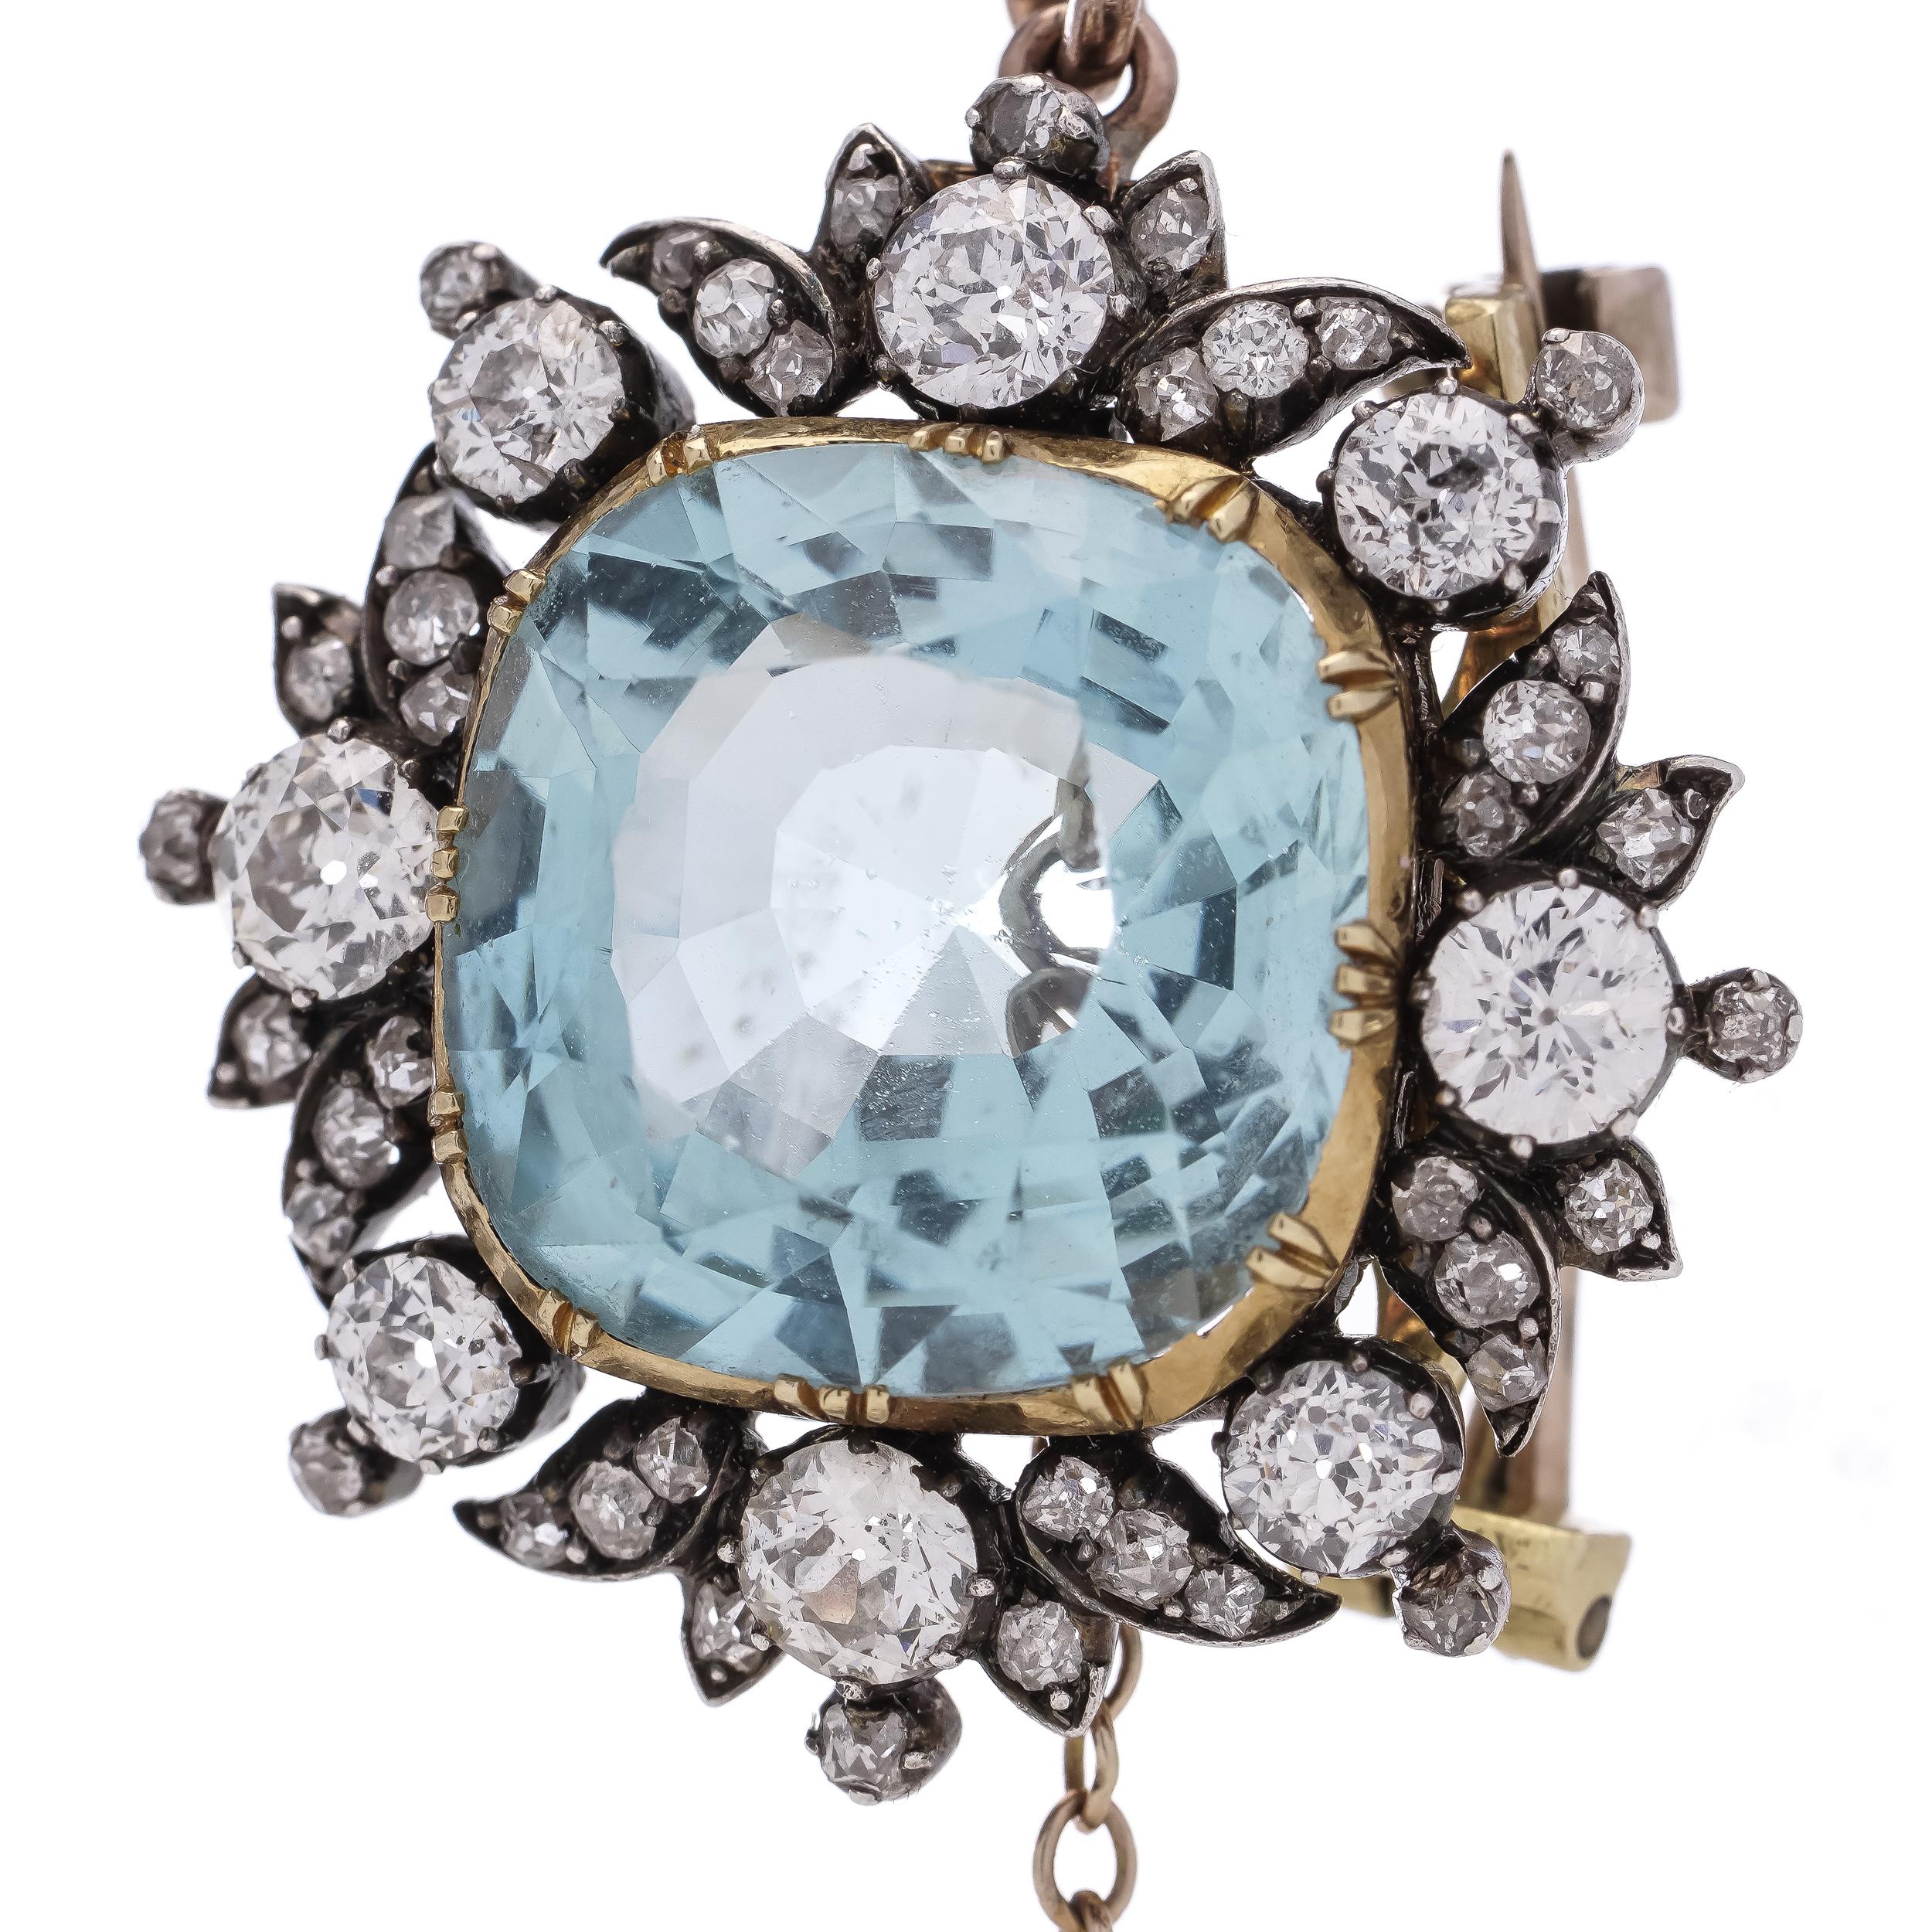 19th Century 9kt gold and silver 7.17 cts. of cushion-cut Aquamarine brooch For Sale 2